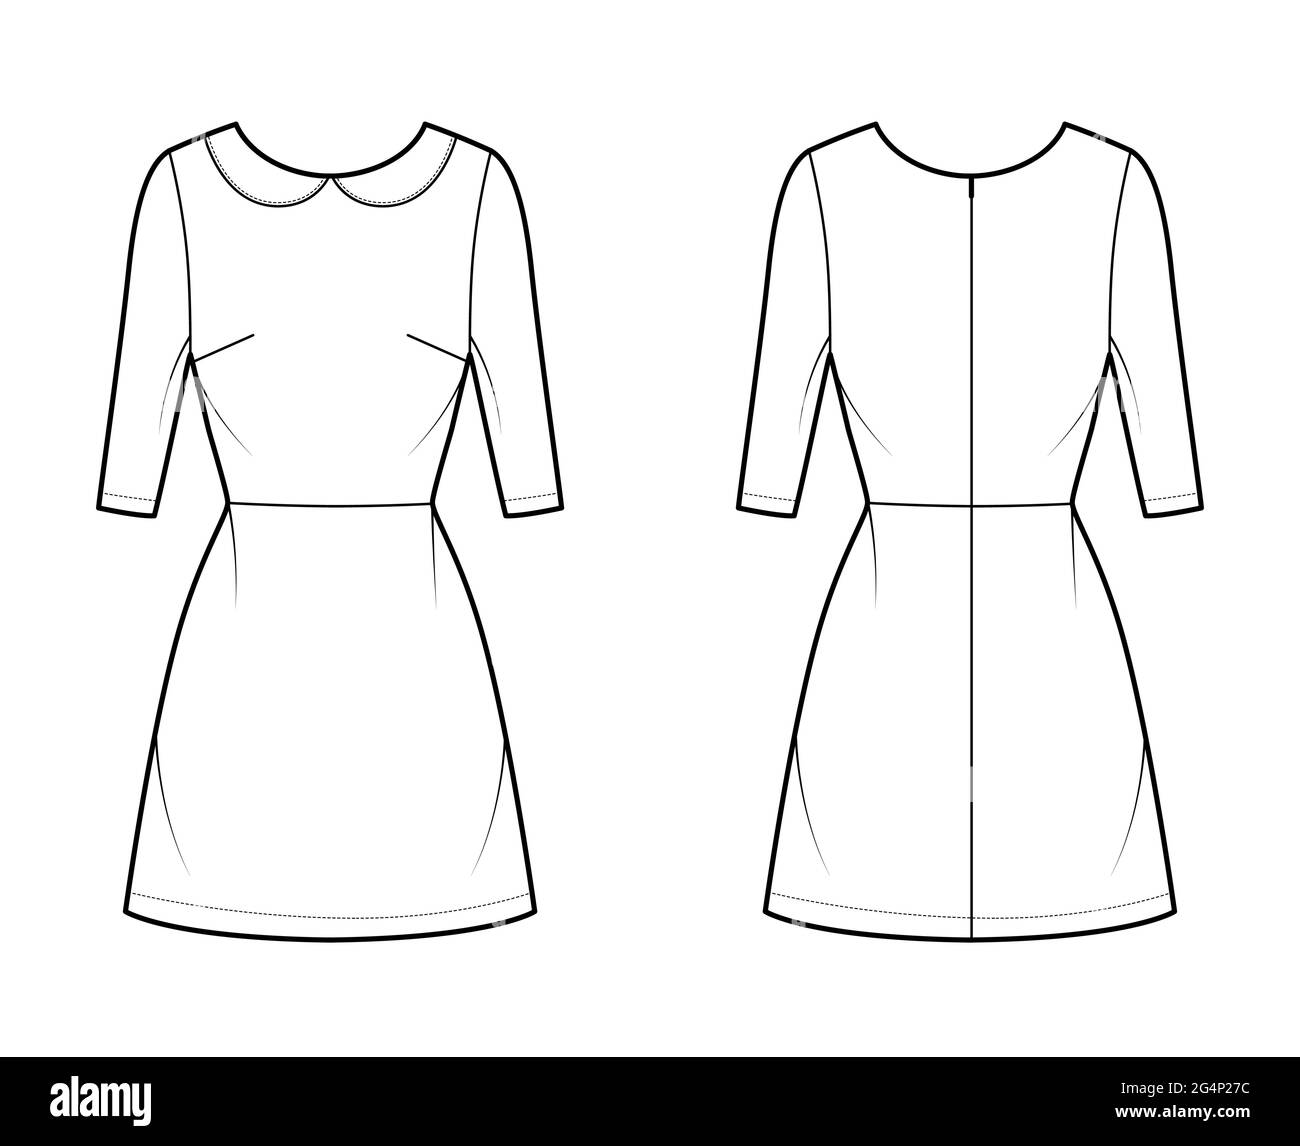 Dress A-line technical fashion illustration with elbow sleeves, peter ...